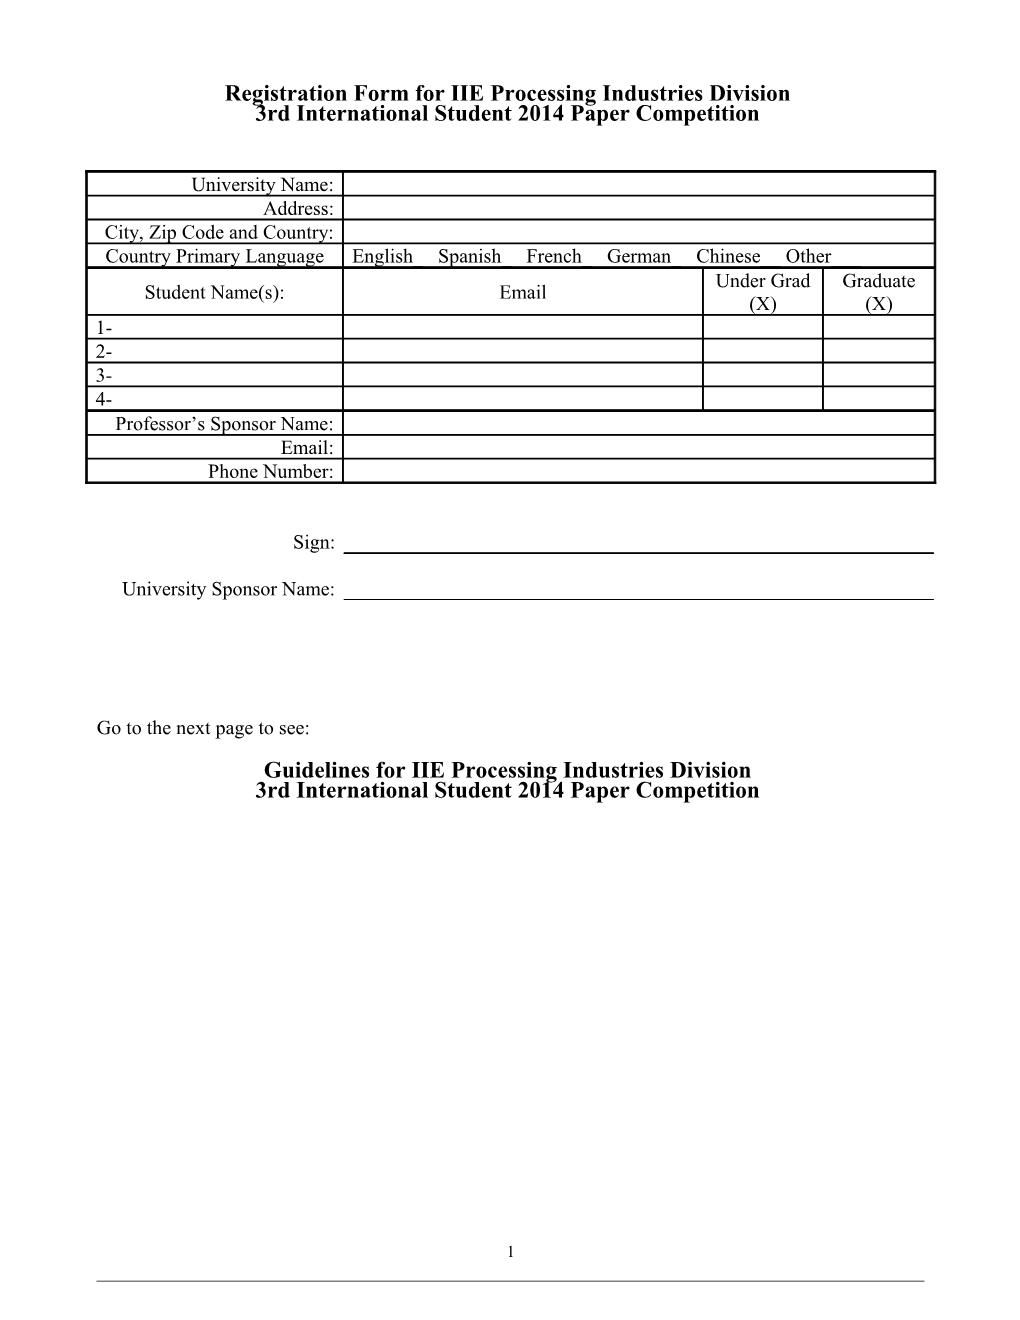 Registration Form for IIE Processing Industries Division